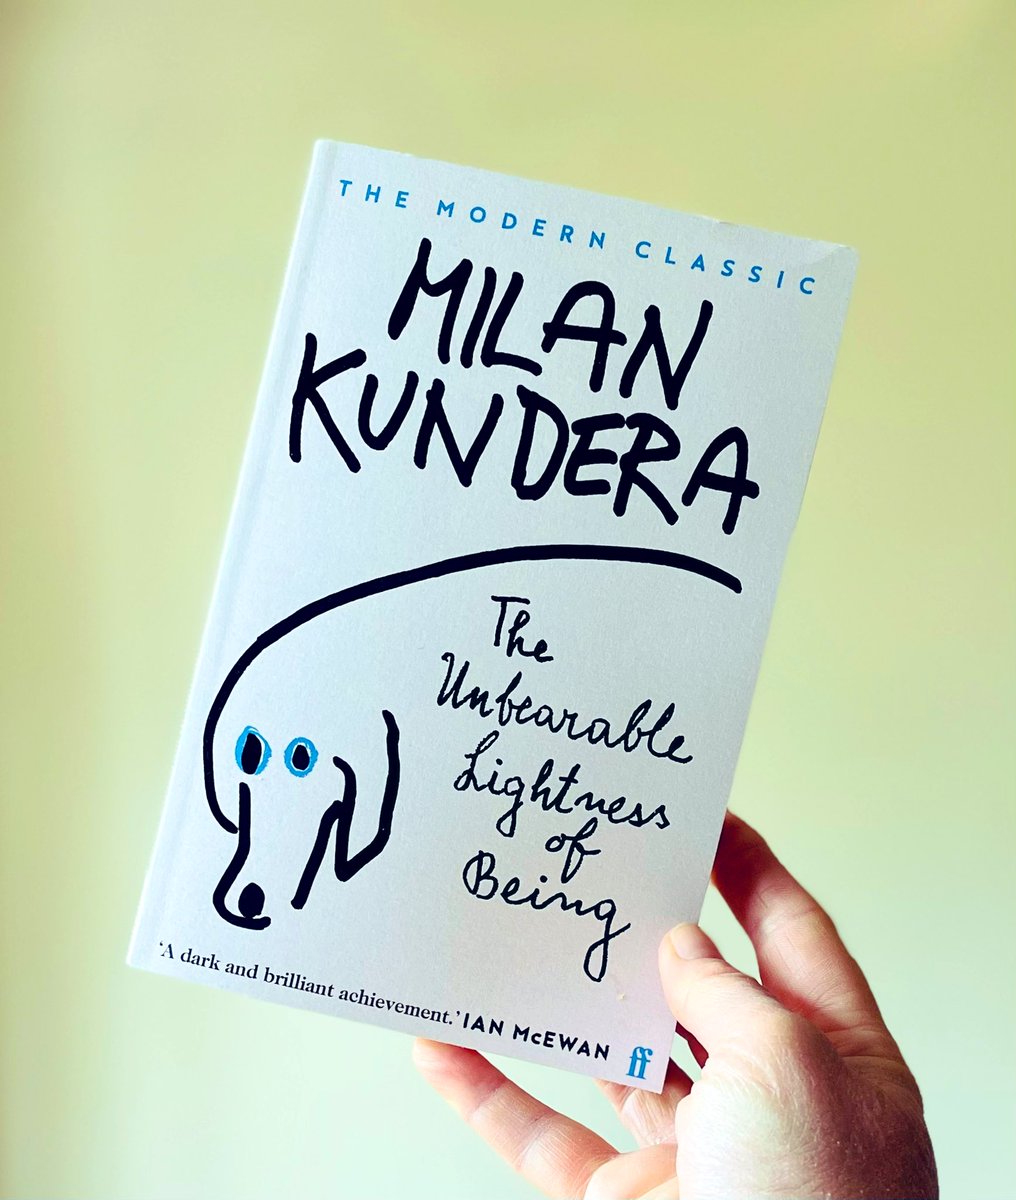 Thank you very much to @ArabellaWatkiss and @FaberBooks for my 40th anniversary edition of the modern classic #TheUnbearableLightnessofBeing by #MilanKundera I have never read it, so am intrigued to find out more!